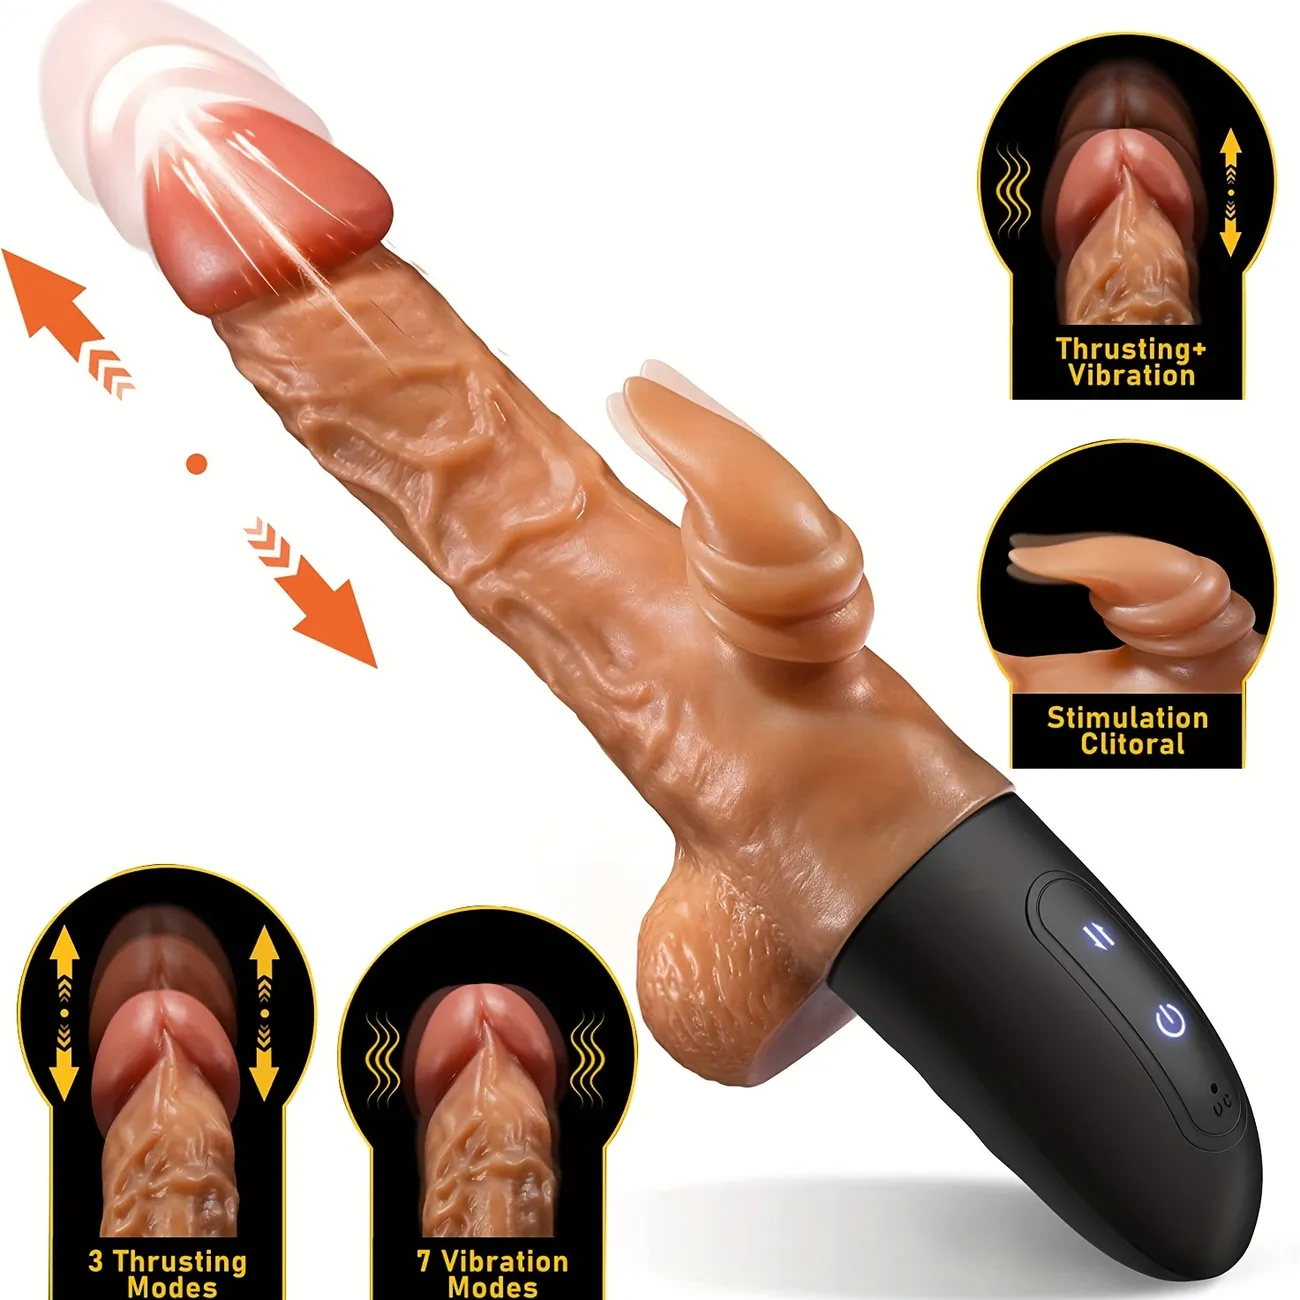 Excite Yourself Thrusting Dildo Vibrator For Women - Realistic Dildo Adult Sex Toys For Couple Pleasure and G-spot Stimulation With 3 Thrusting and 7 Vibrating Modes